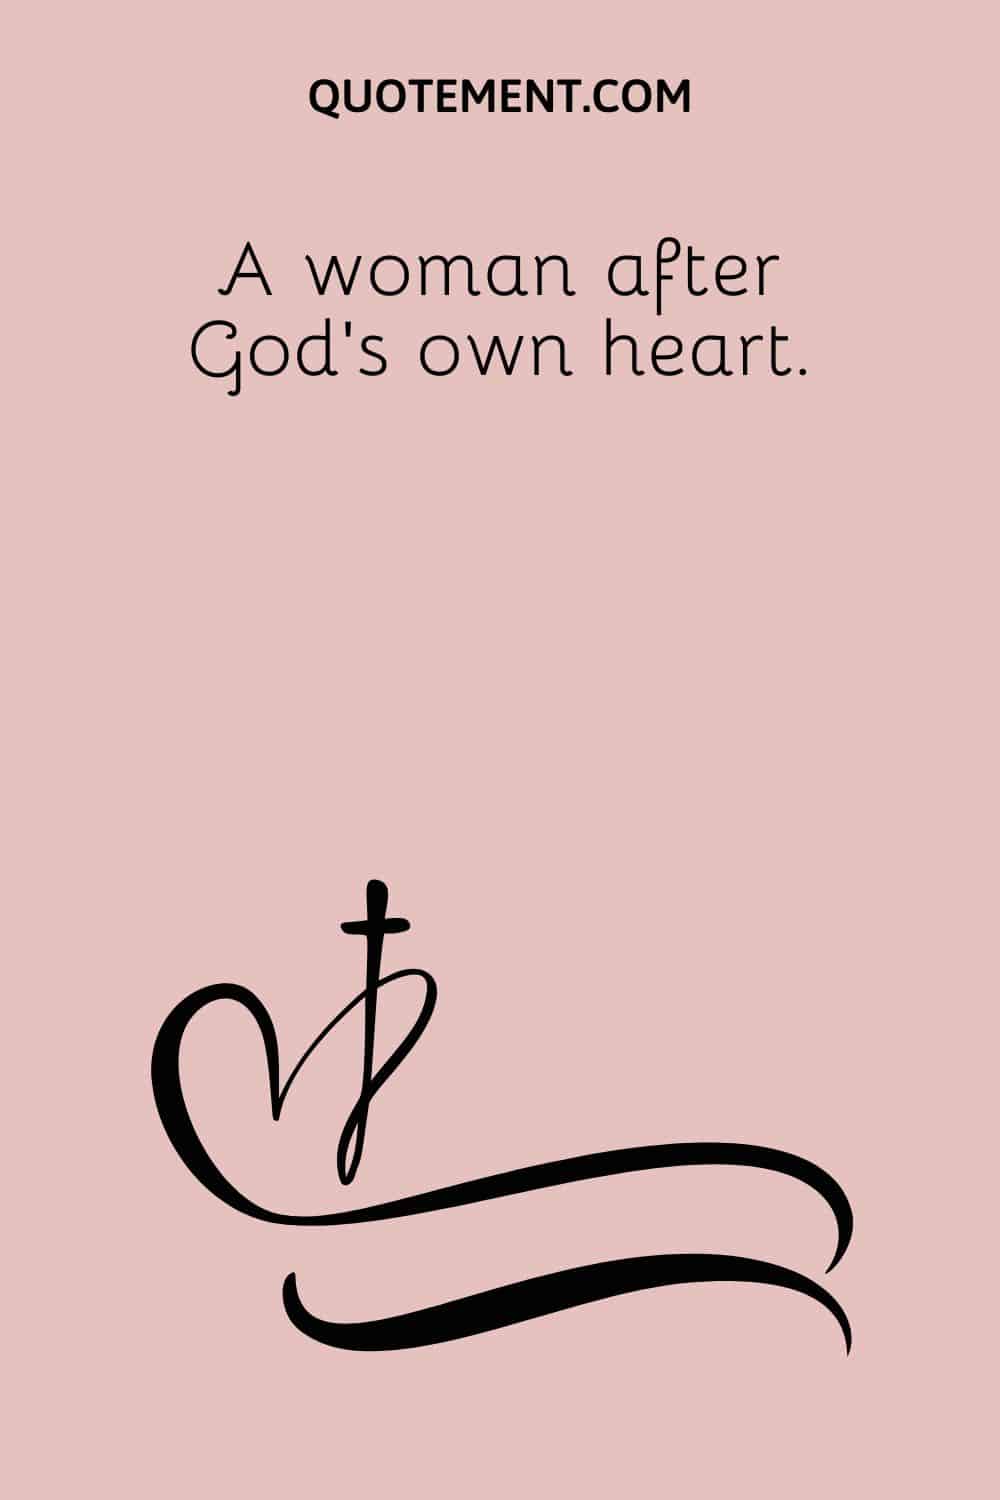 A woman after God’s own heart